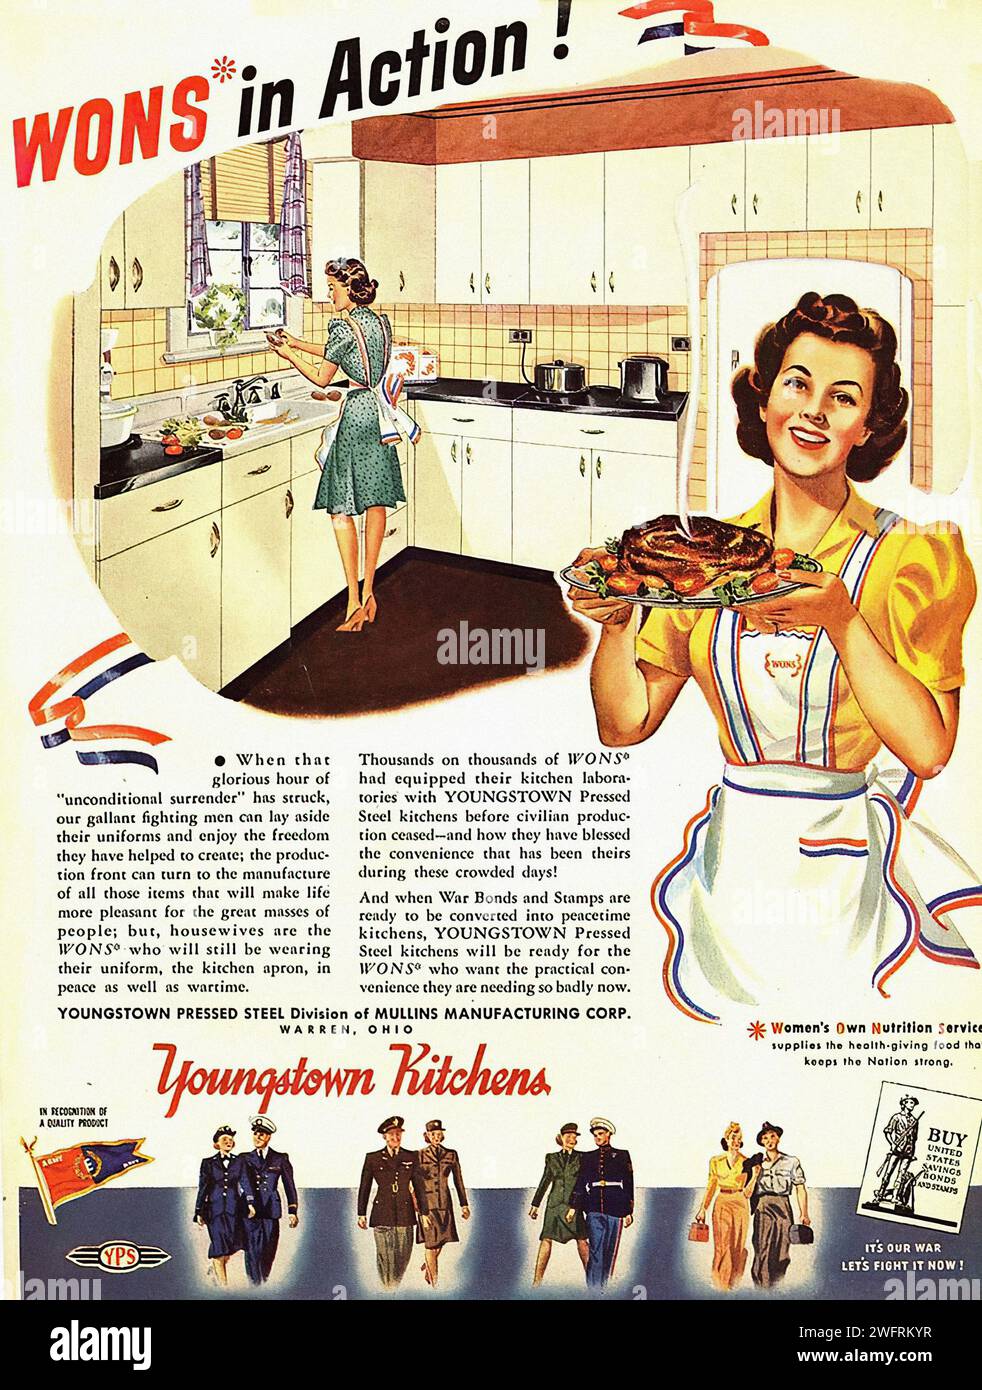 “WONS IN ACTION! YOUNGSTOWN KITCHENS.”  A vintage advertisement from the World War II era, featuring a vibrant depiction of a woman , carrying a tray of food in a well-equipped kitchen. The kitchen showcases a sink, cabinets, and a stove, indicative of the Youngstown Kitchens brand. The image is rendered in a retro, cartoon-like style, typical of American advertising during this period. The capitalized text “WONS IN ACTION! YOUNGSTOWN KITCHENS.” adds to the overall appeal of the advertisement.- American (U.S.) advertising, World War II era Stock Photo